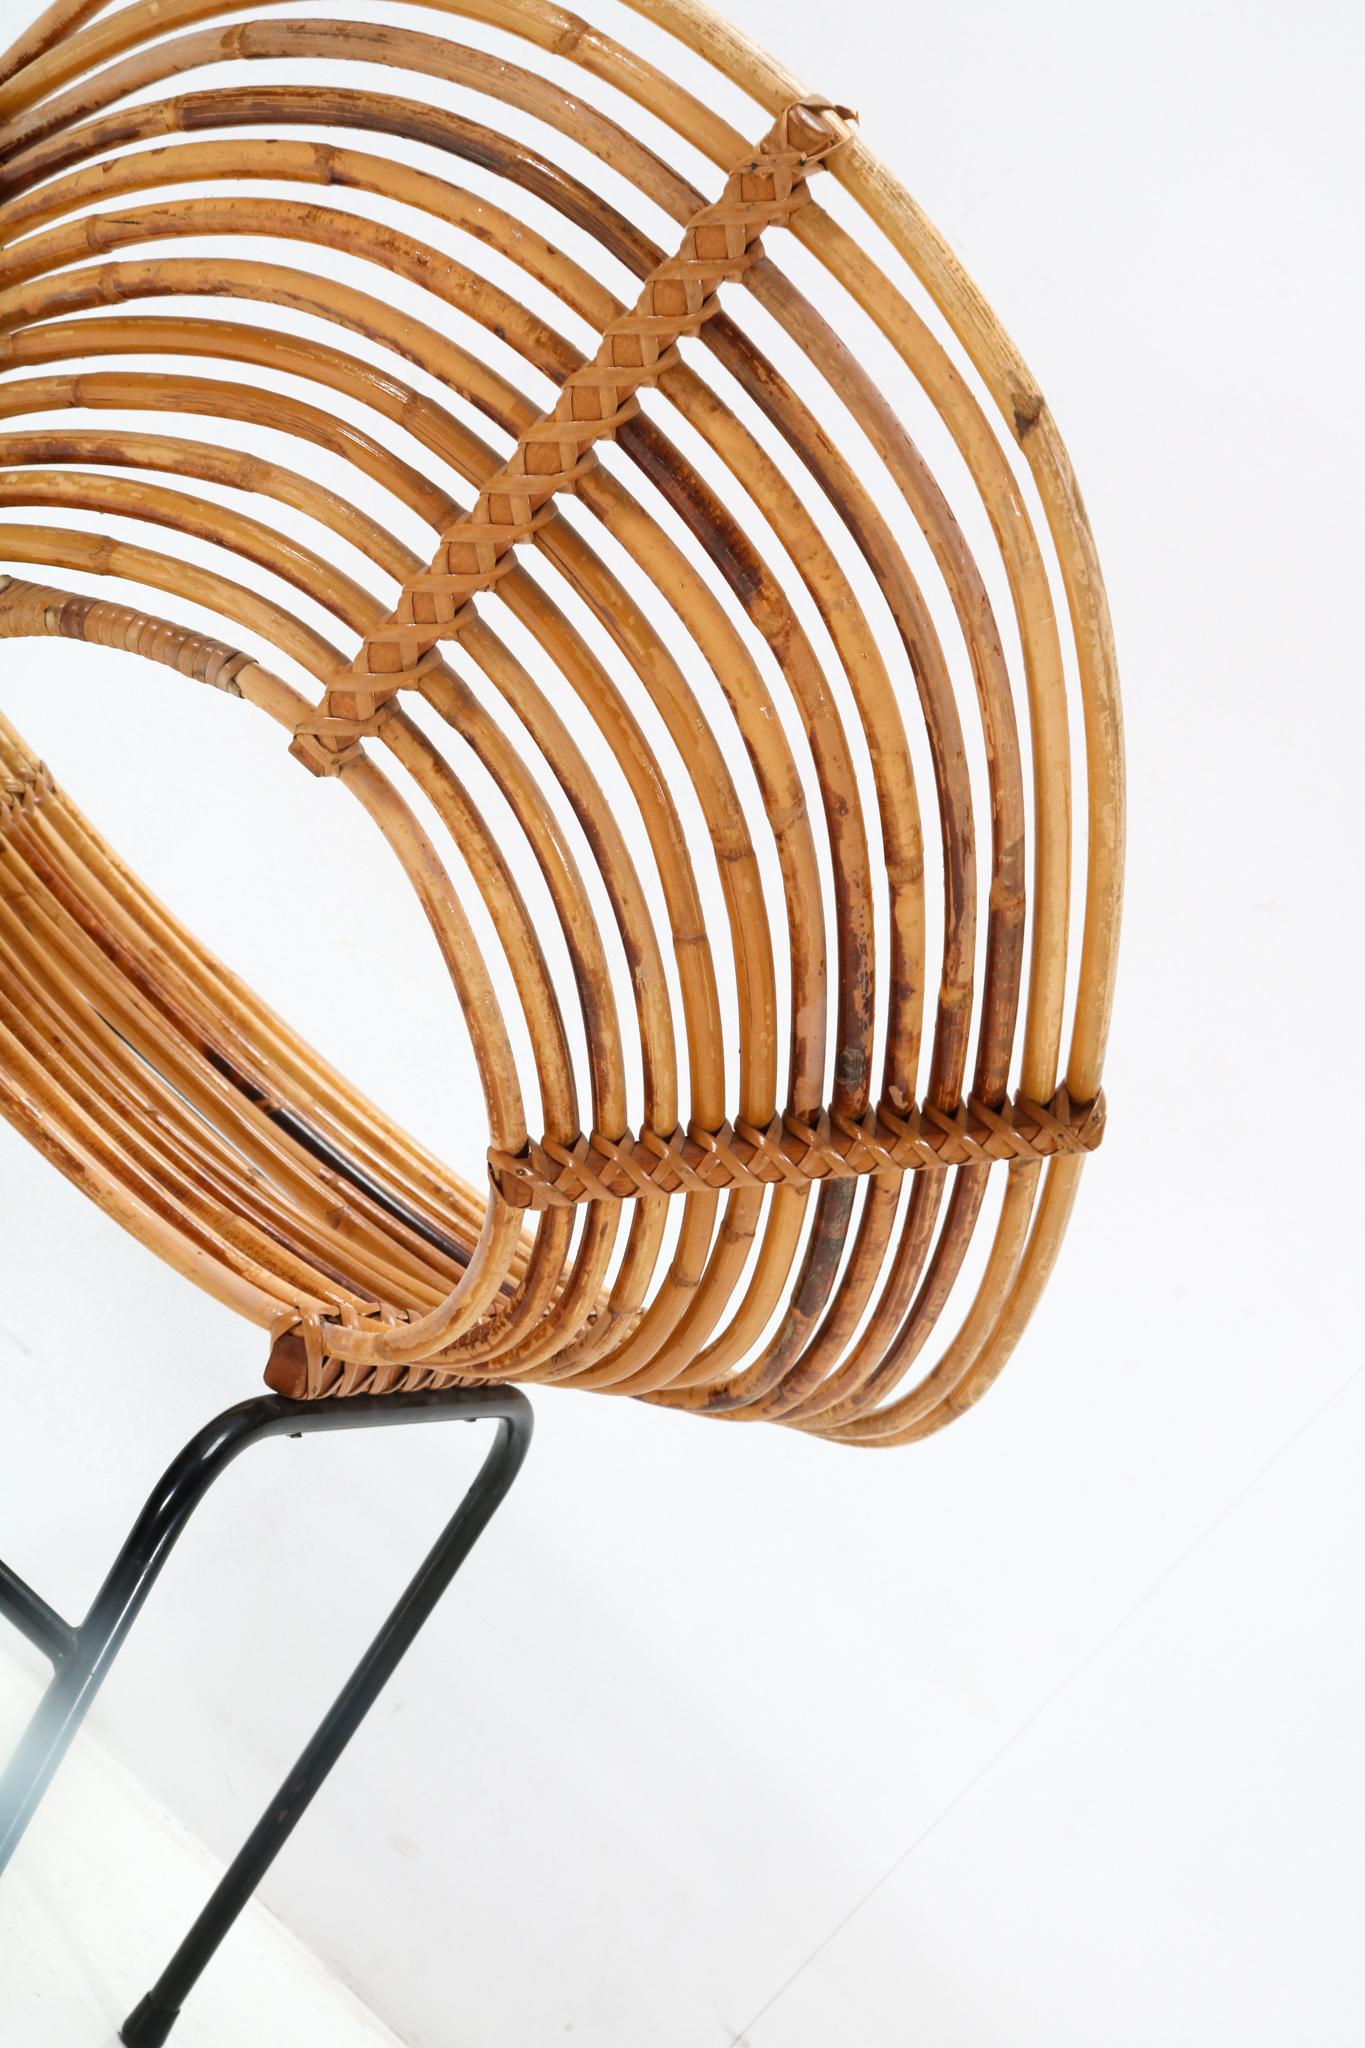 Rattan Mid-Century Modern Lounge Chair by Dirk van Sliedregt for Rohe, 1950s For Sale 4